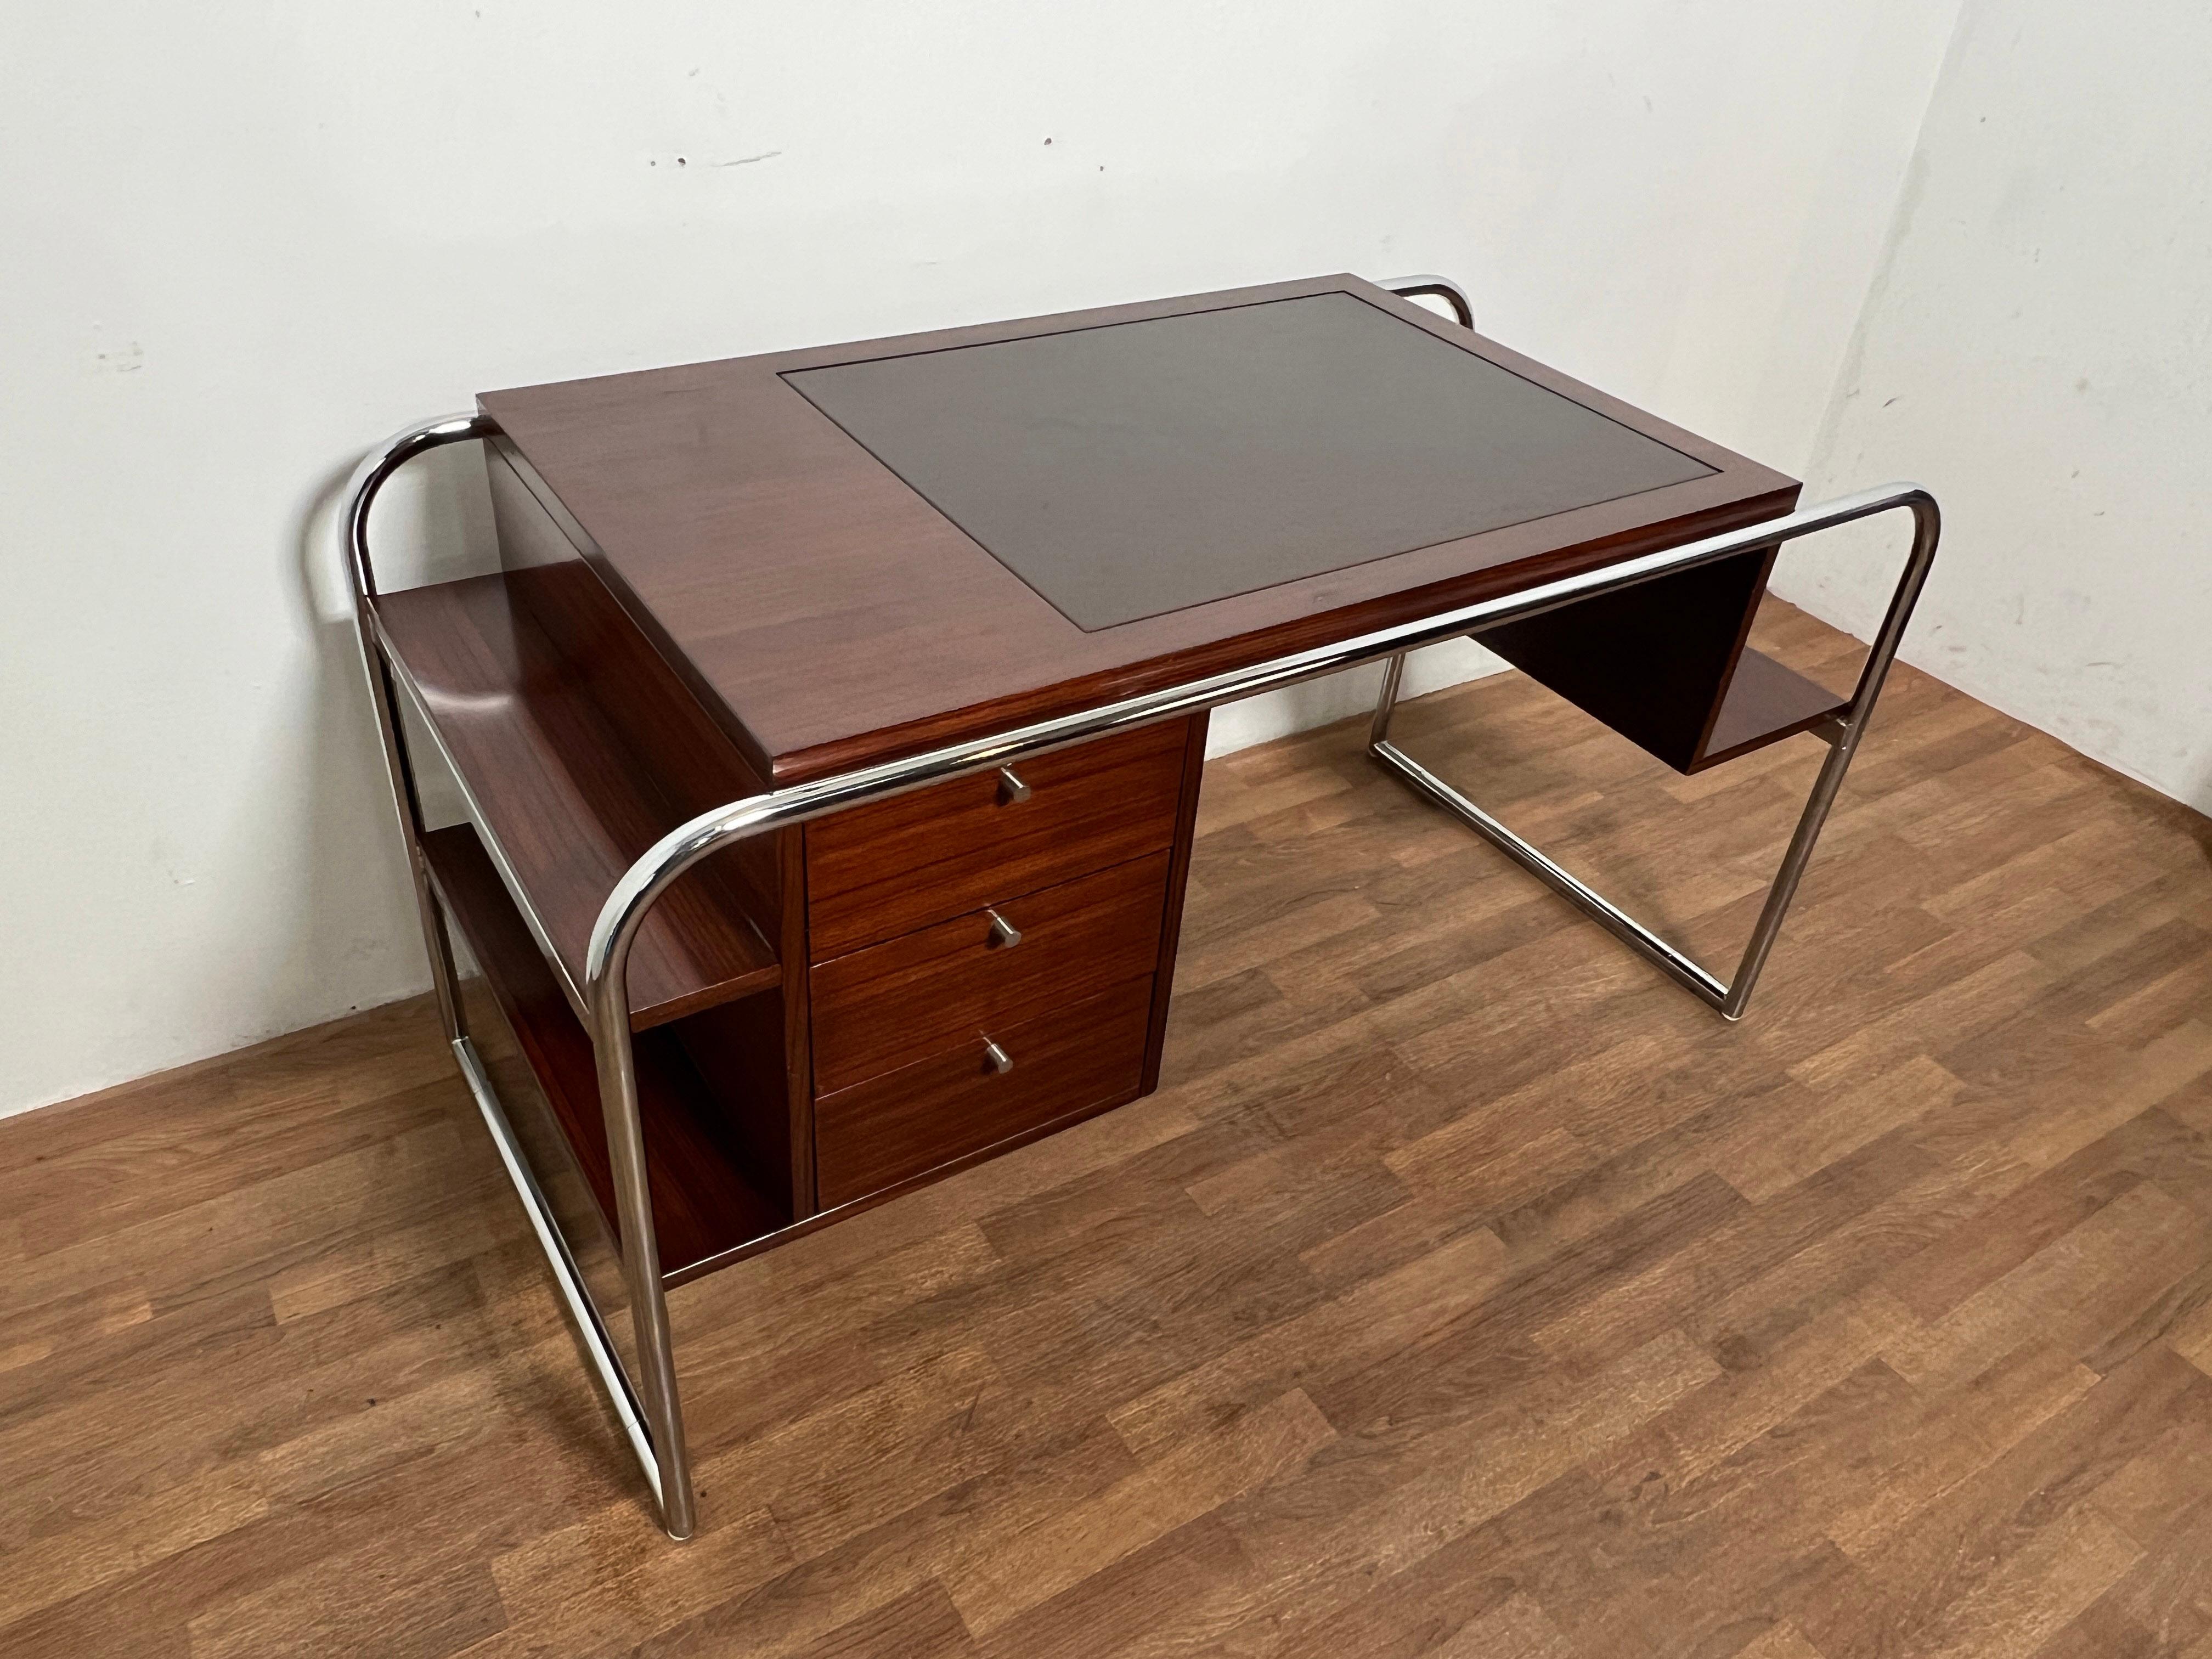 A Bauhaus inspired design in rosewood with tubular chrome framework and a leather insert top by Ralph Lauren from his Laurel Drive Collection.